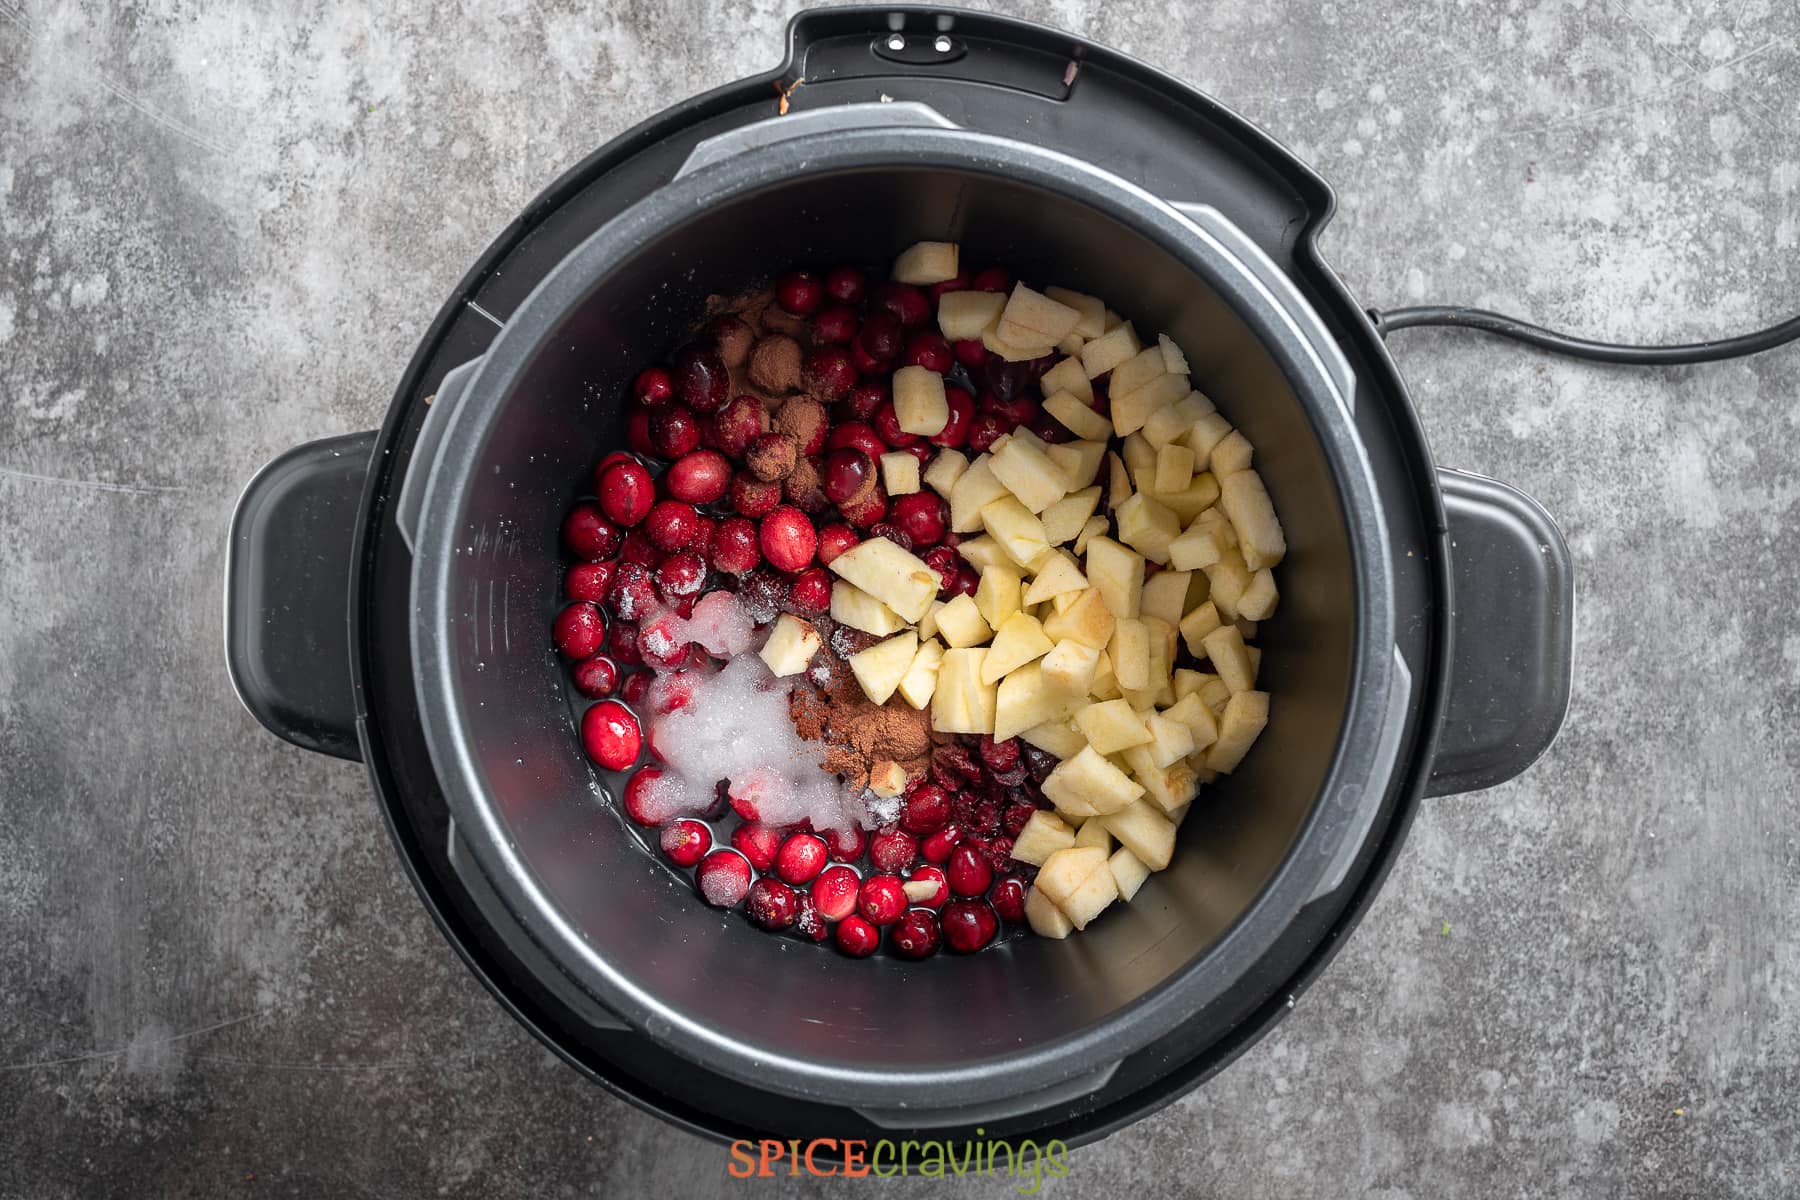 chopped apple, spices, sugar and cranberries added to the instant pot